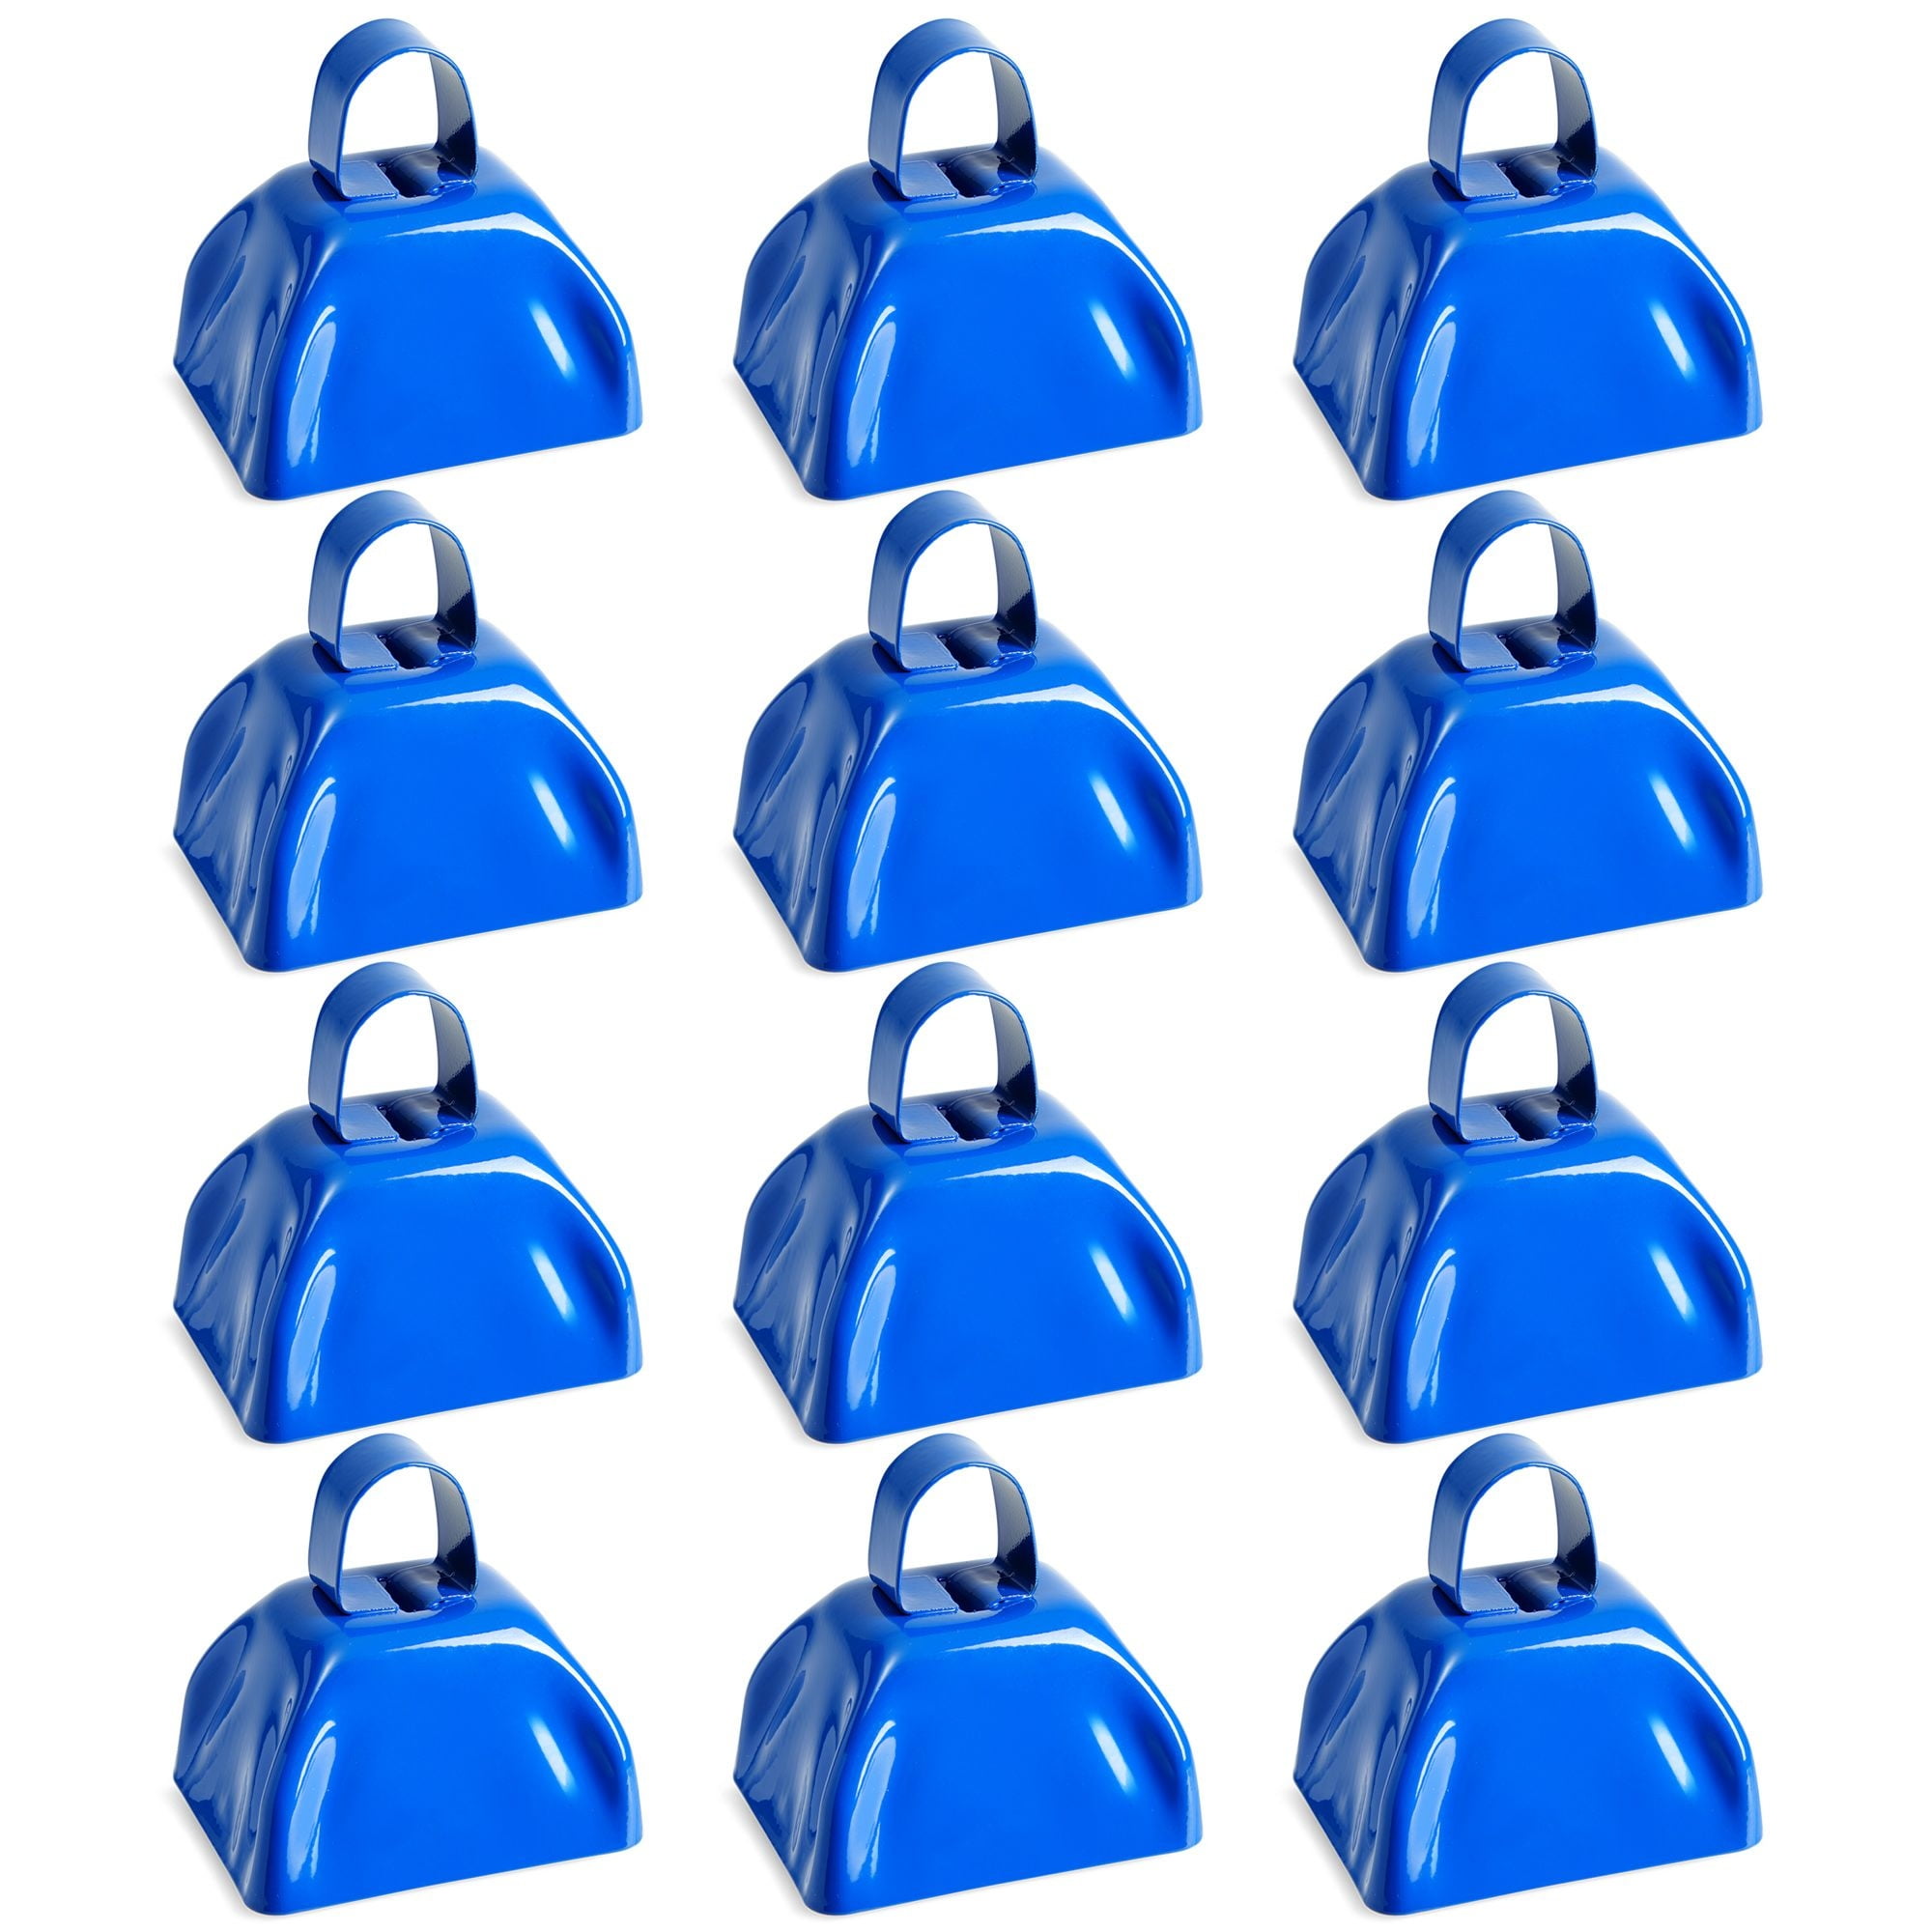 12-Pack Blue Cow Bells Noise Makers with Handle, Hand Percussion Cowbells  for Sporting Events, Football Games, Graduation Ceremonies, Welcome Parties